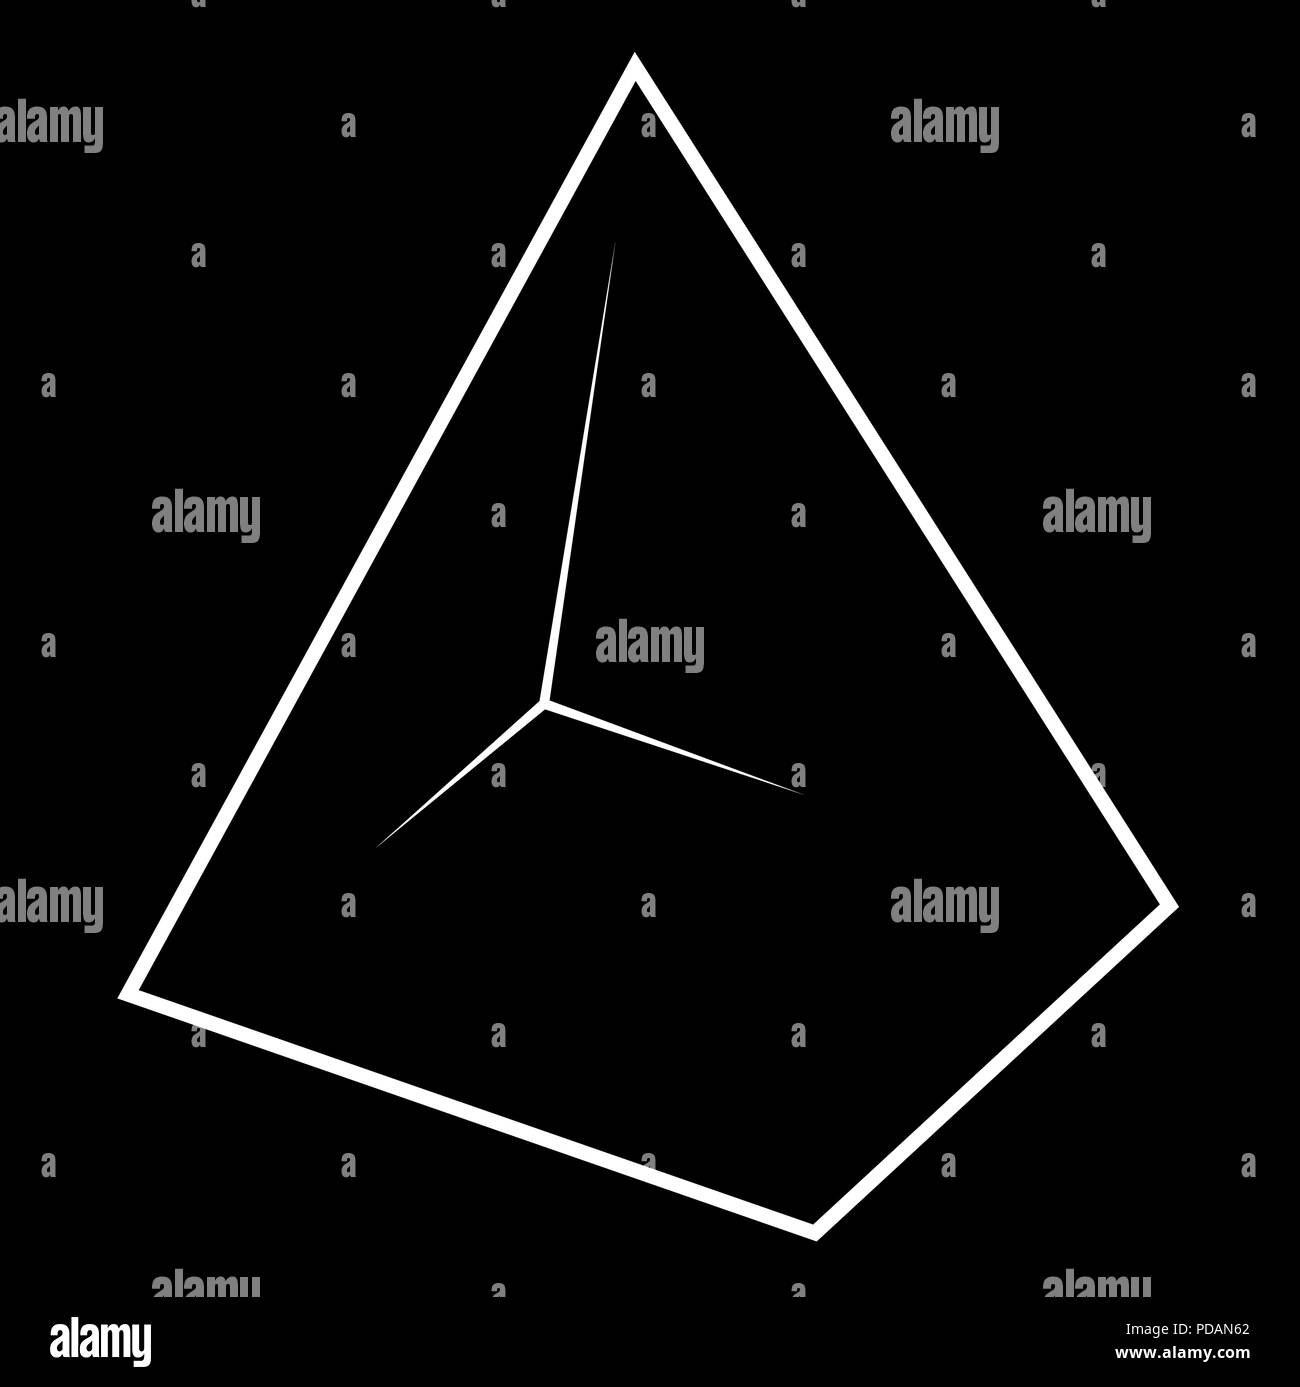 silhouette of a pyramid of lines on a black background geometry minimalist logo Stock Vector